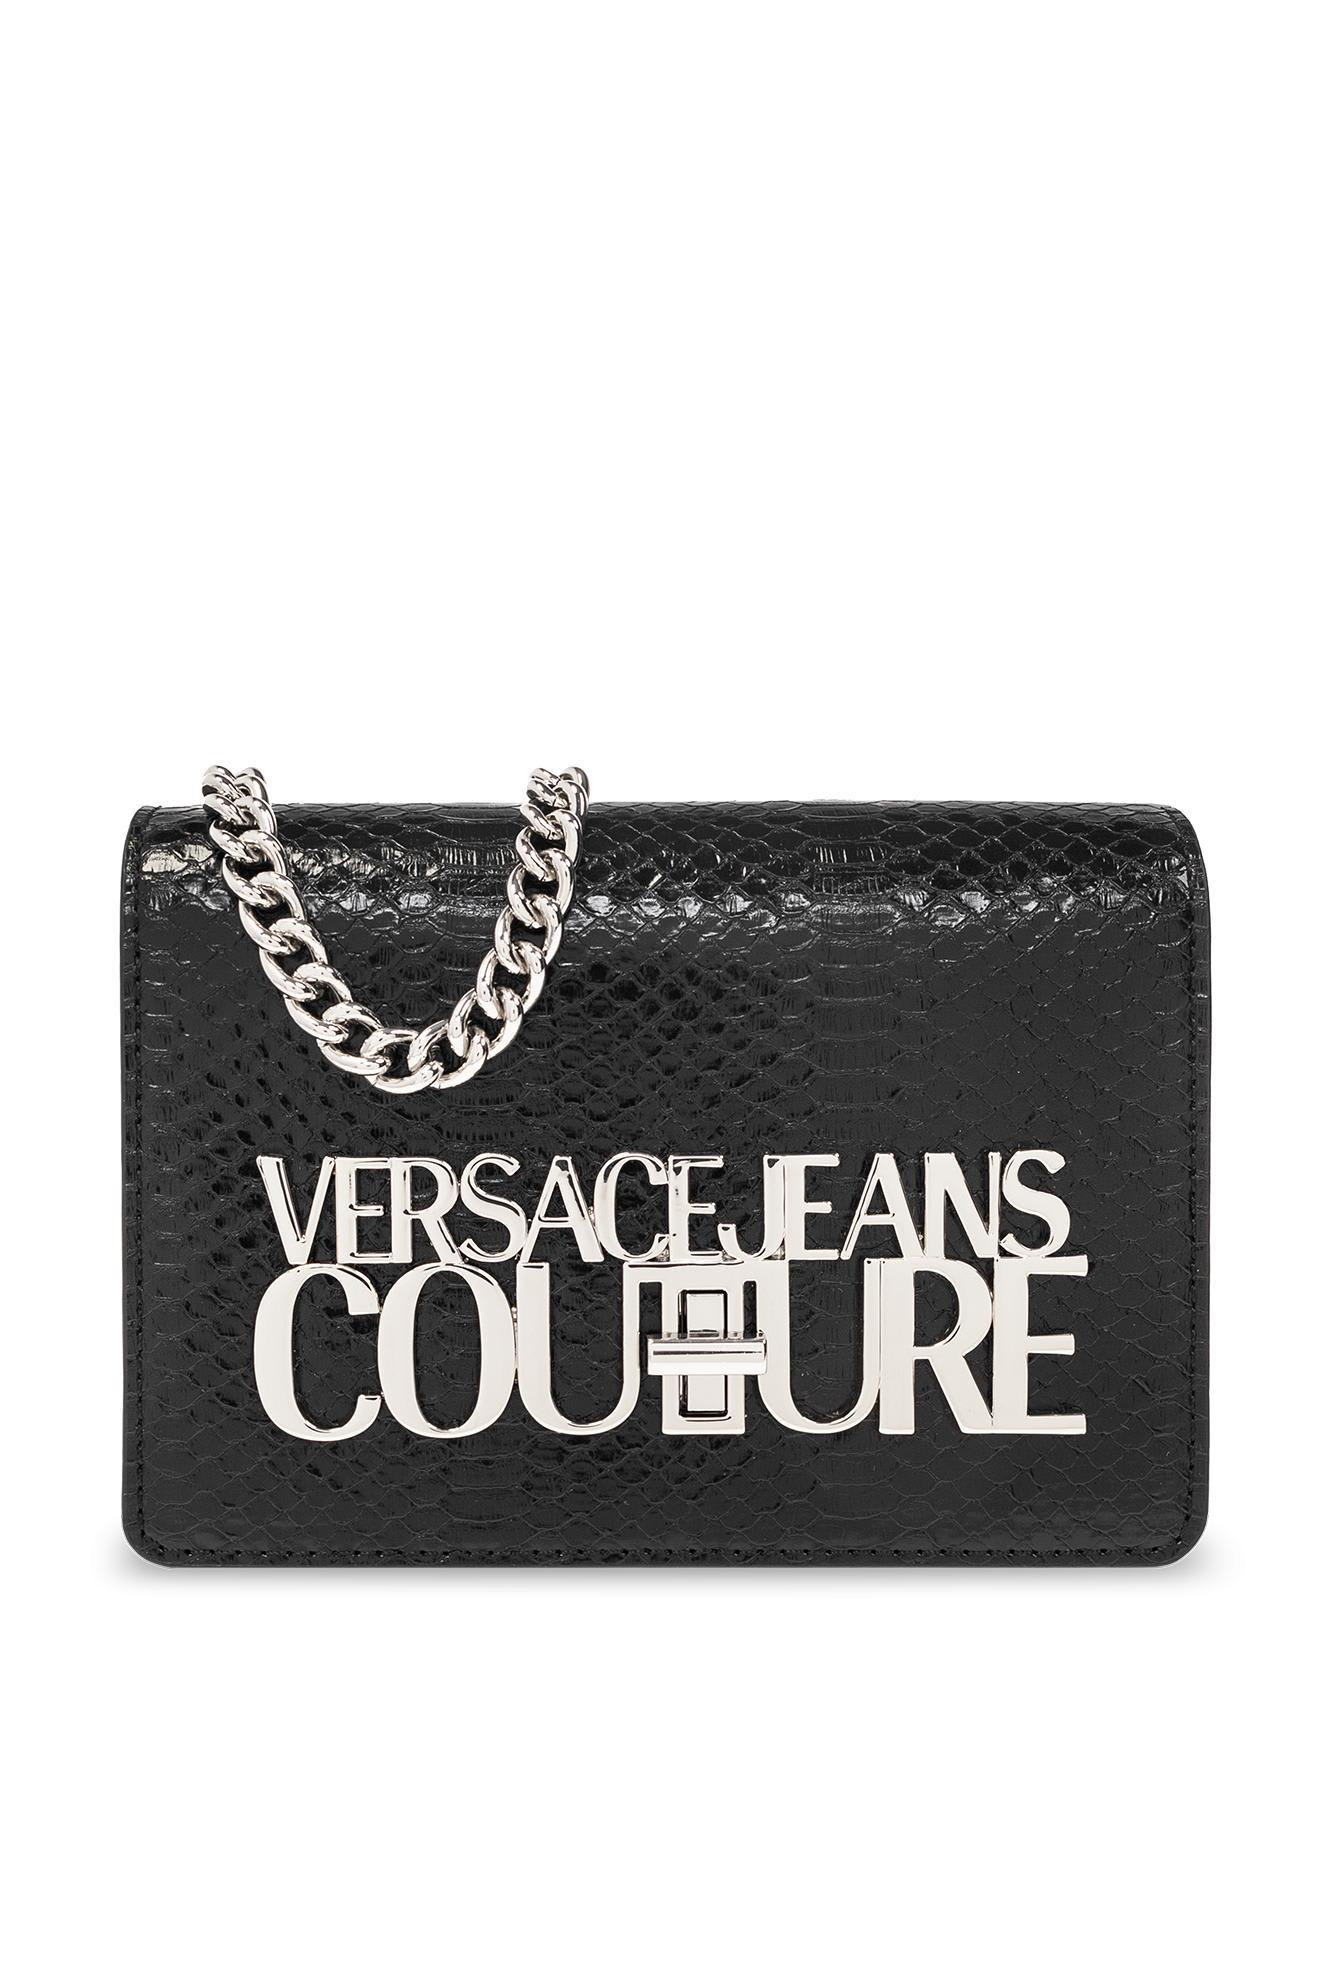 Versace Jeans Couture Shoulder Bag With Logo in Black